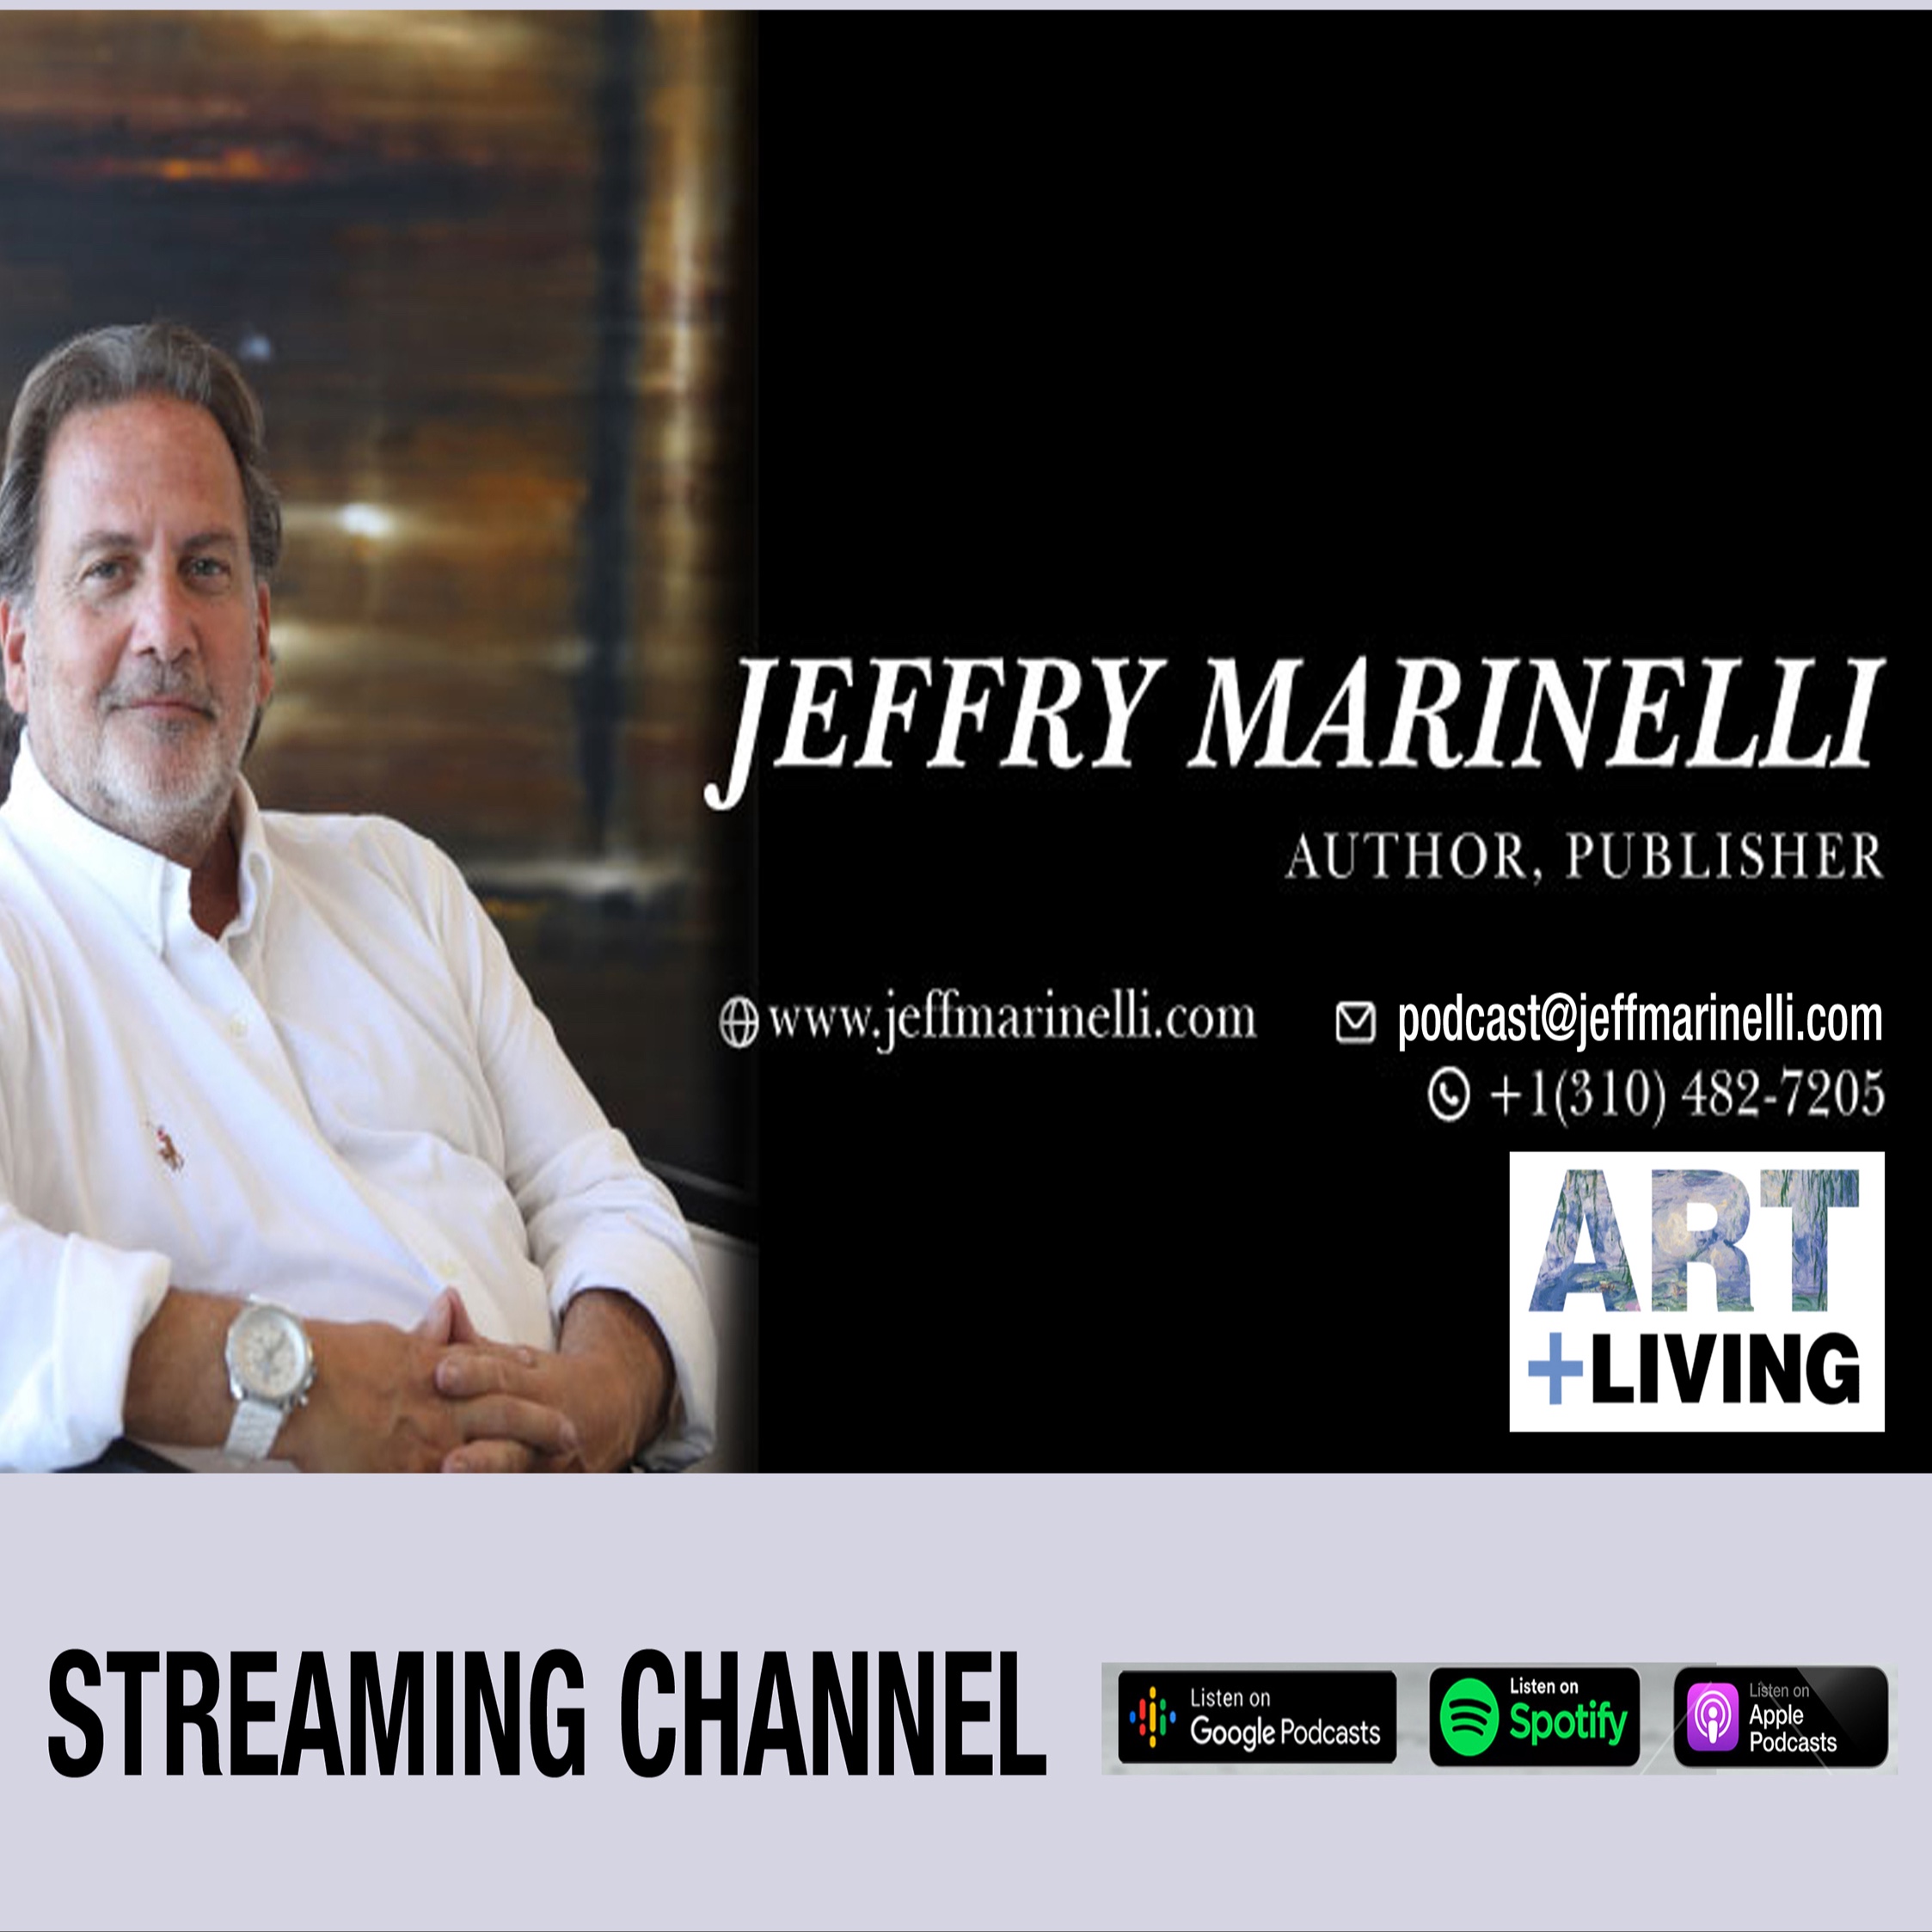 The Jeffry Marinelli Show